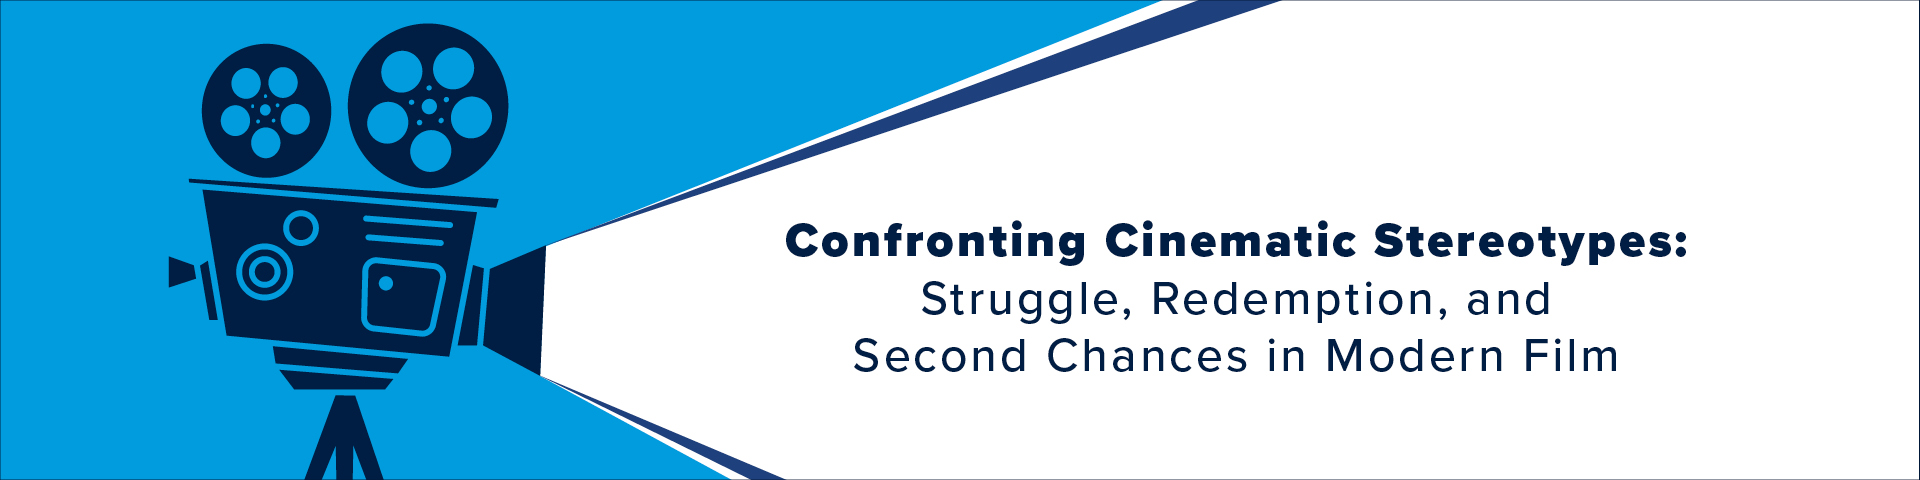 Motion picture film camera illustration projecting light onto text reading "Confronting Cinematic Stereotypes: Struggle, Redemption, and Second Chances in Modern Film"